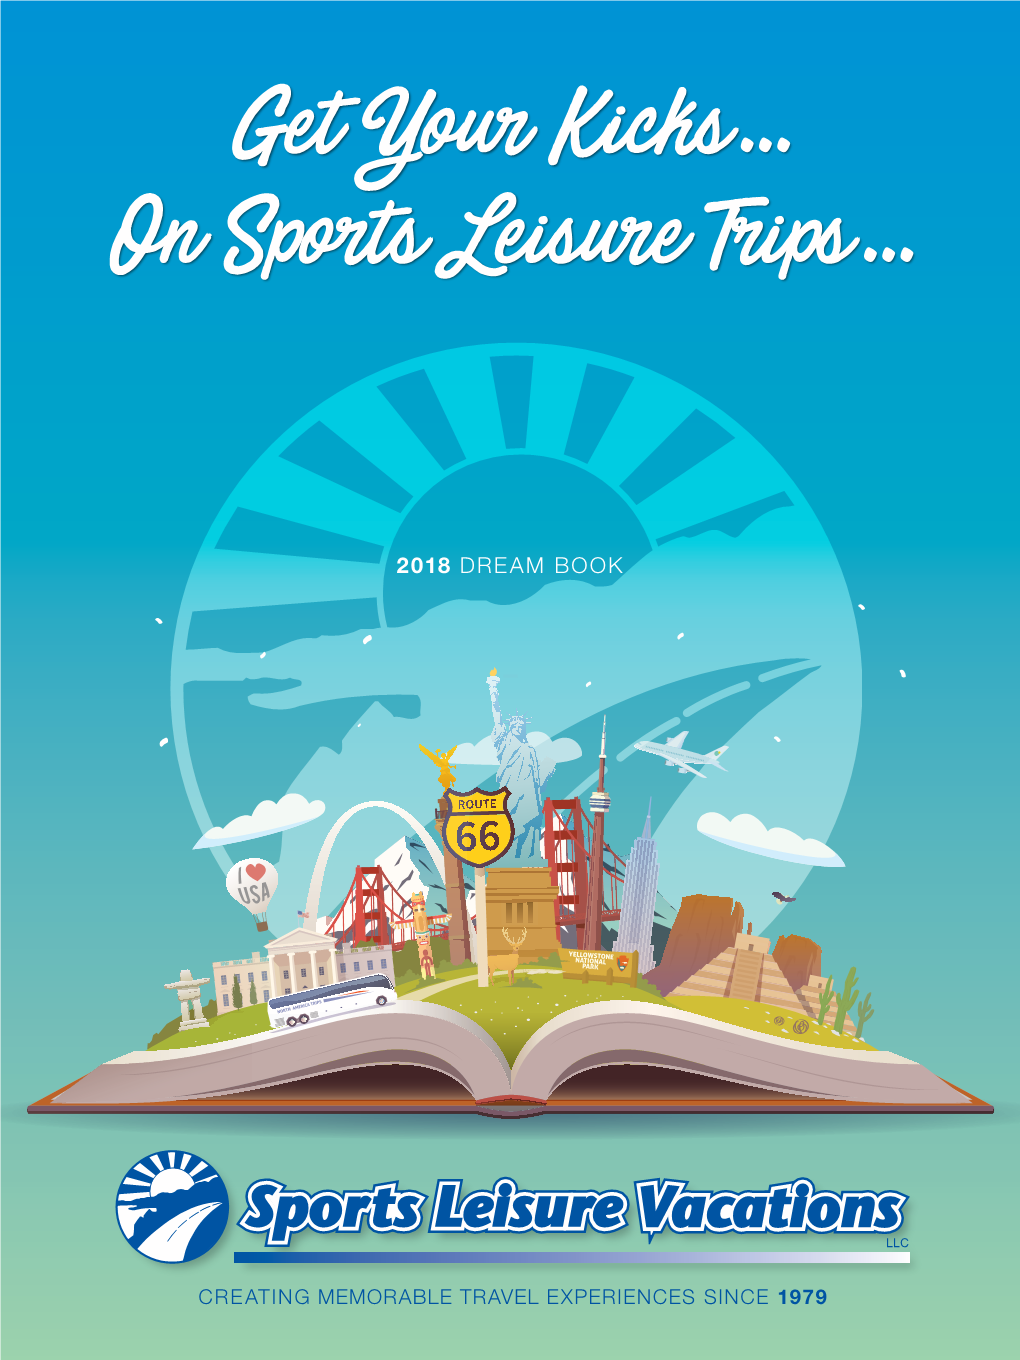 Get Your Kicks on Sports Leisure Trips